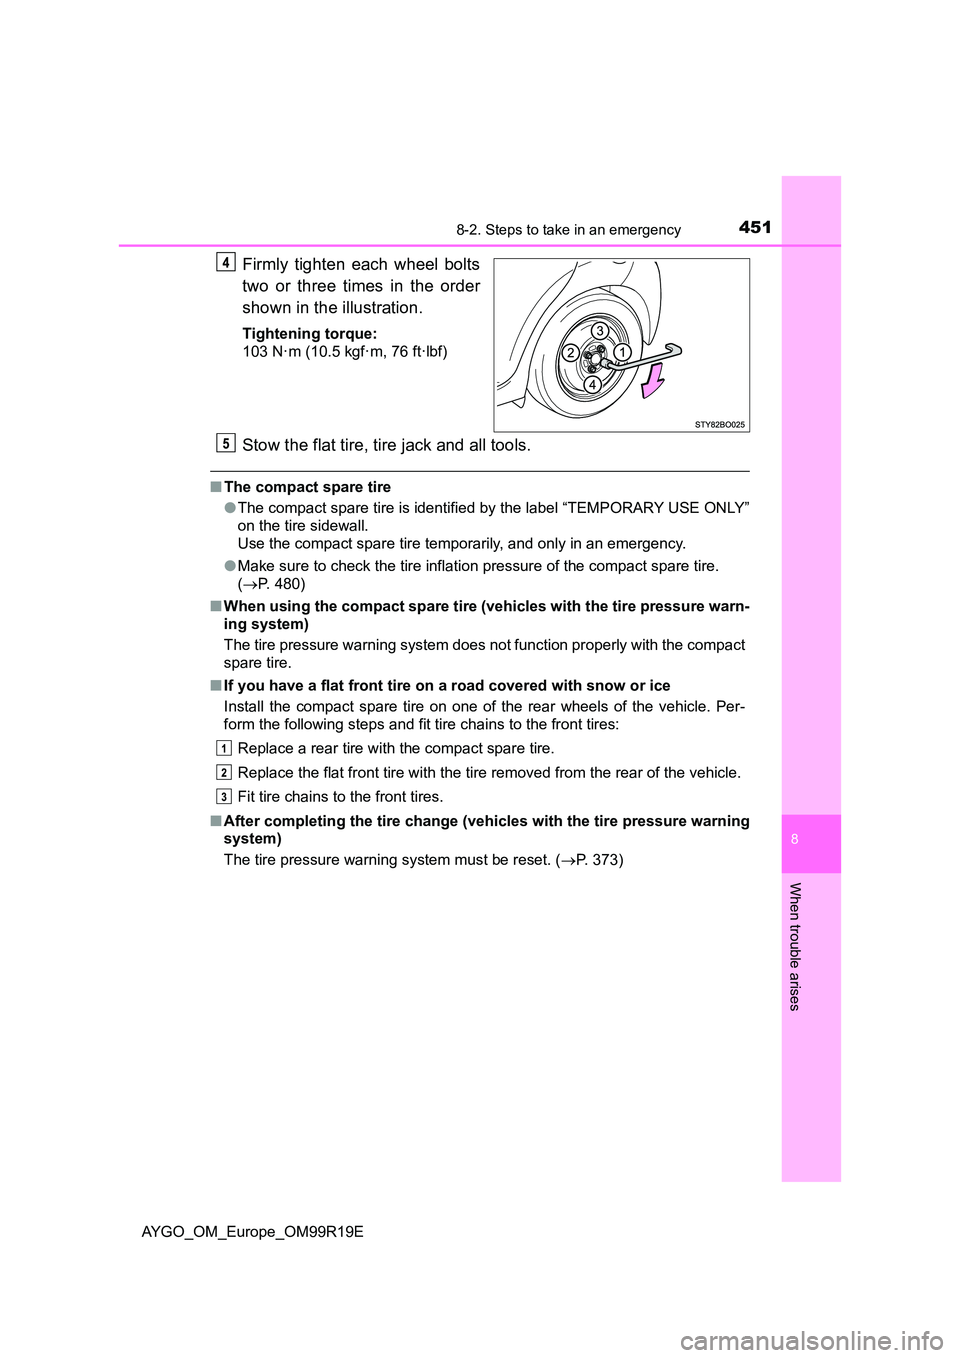 TOYOTA AYGO 2019  Owners Manual (in English) 4518-2. Steps to take in an emergency
8
When trouble arises
AYGO_OM_Europe_OM99R19E
Firmly tighten each wheel bolts 
two or three times in the order 
shown in the illustration.
Tightening torque: 
103